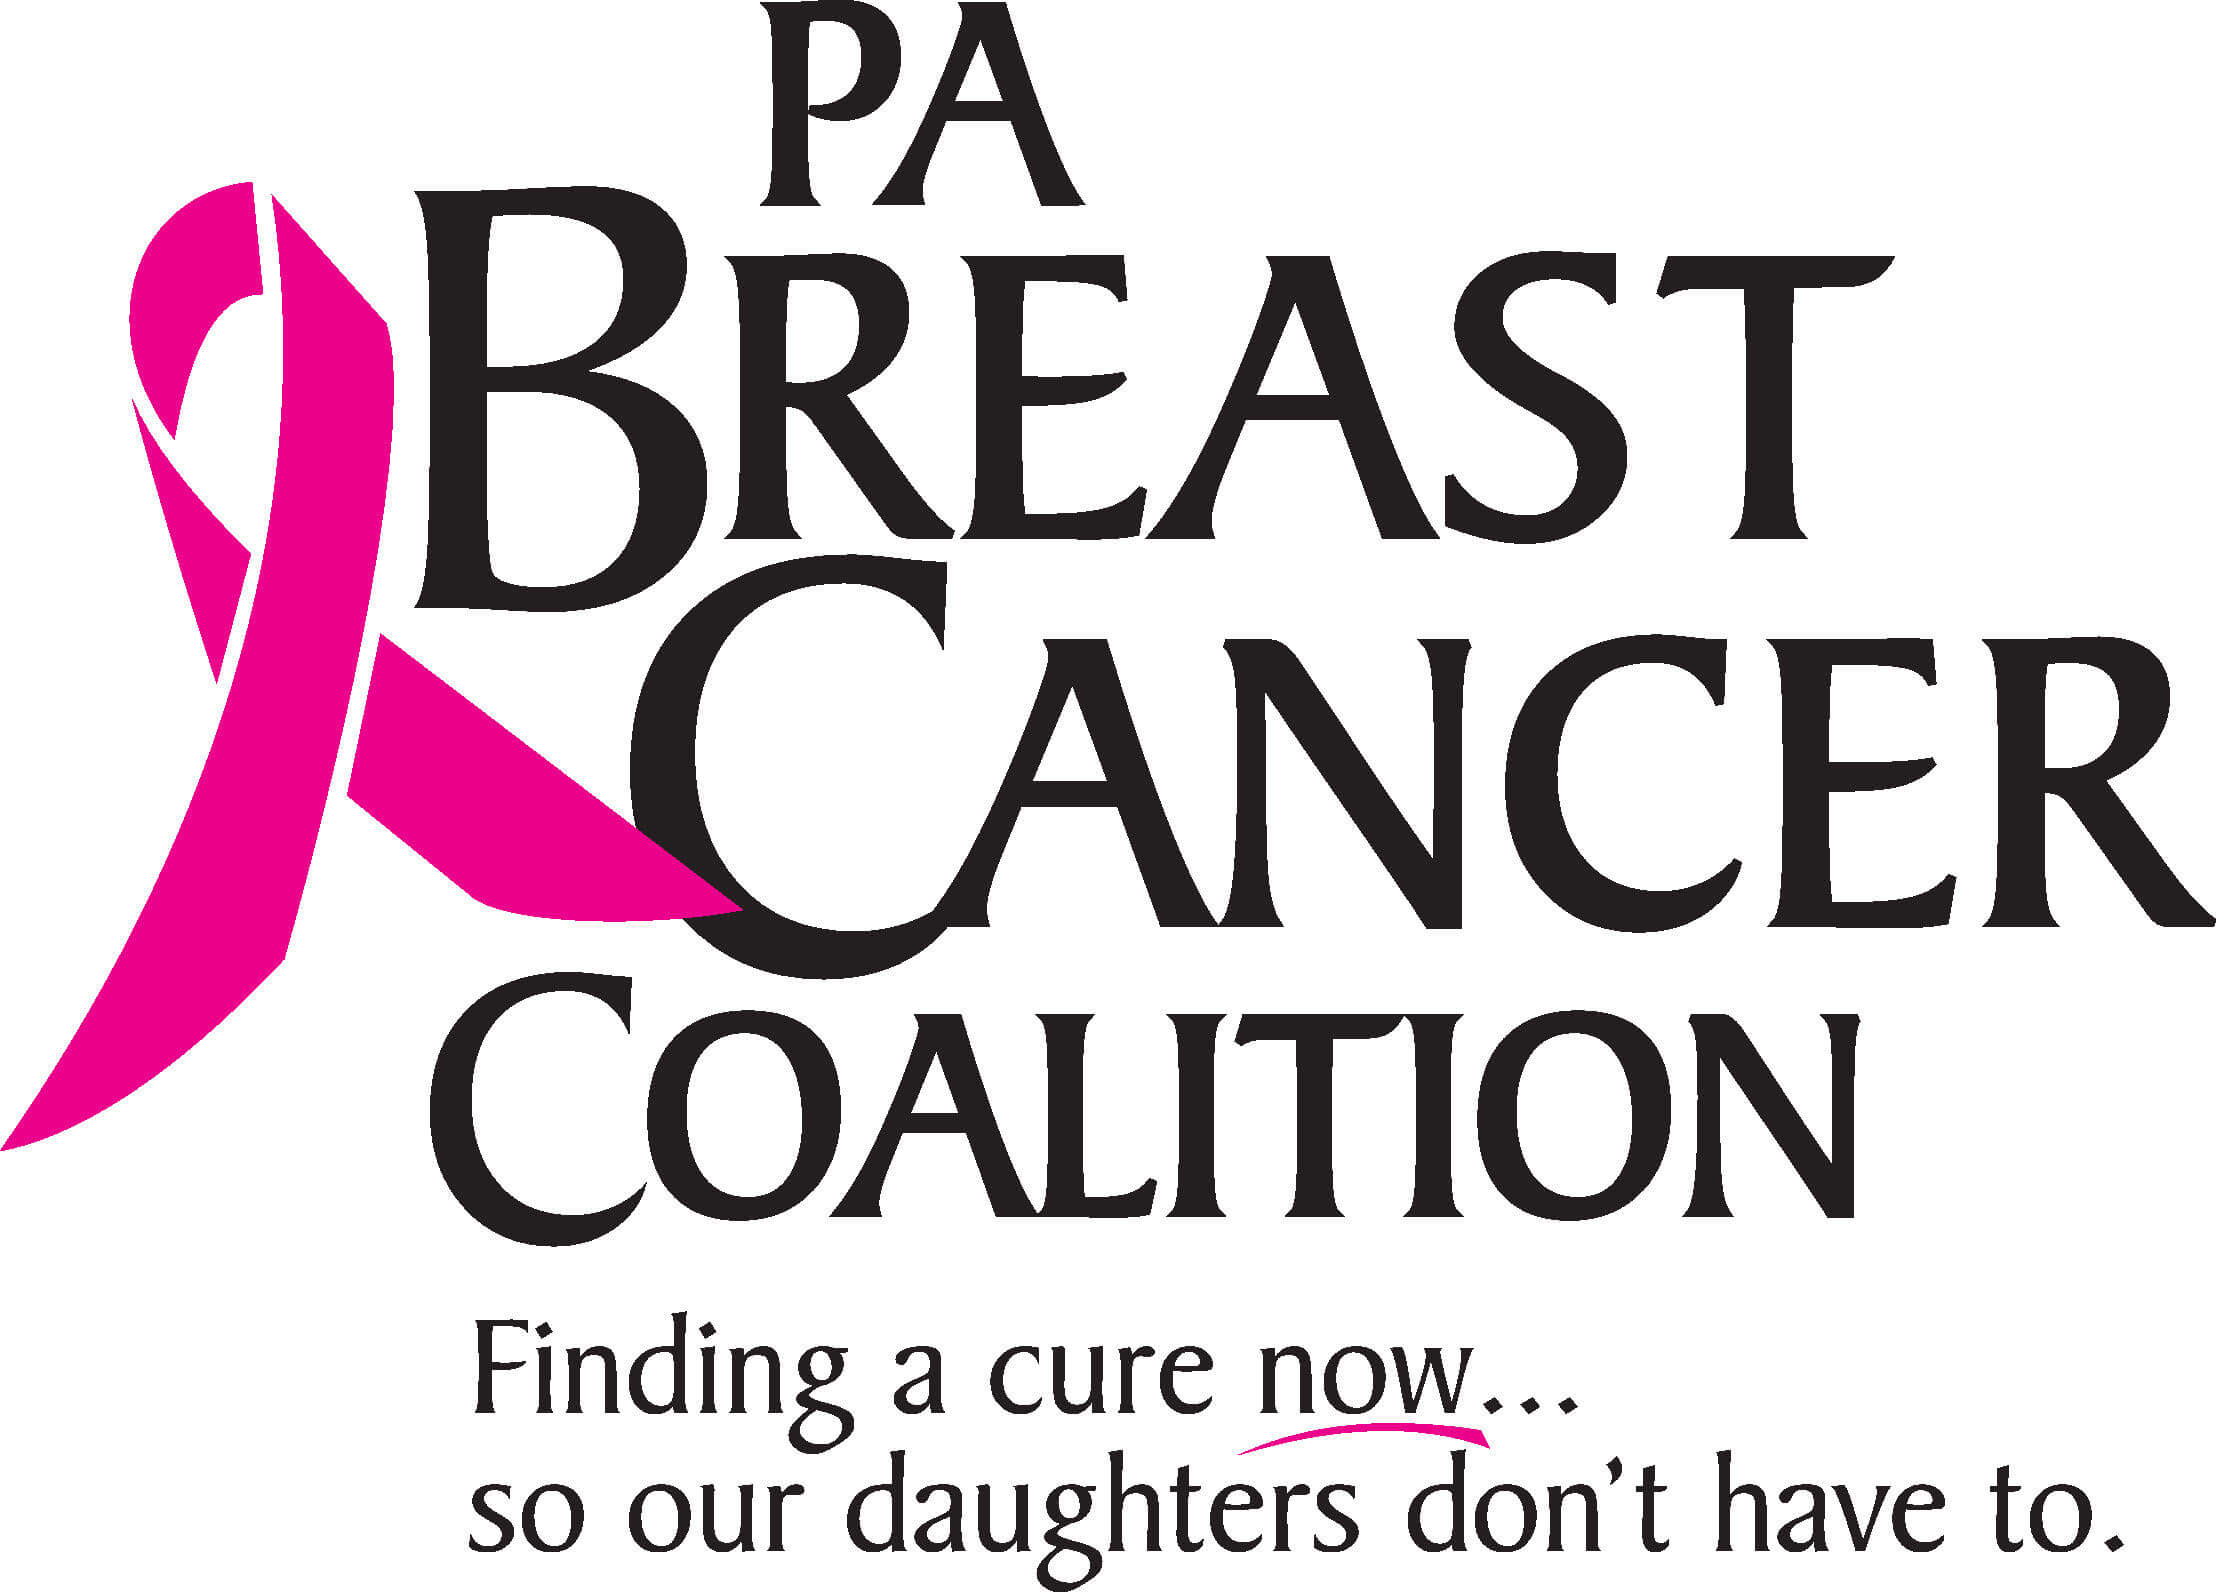 pa breast cancer coalition : 